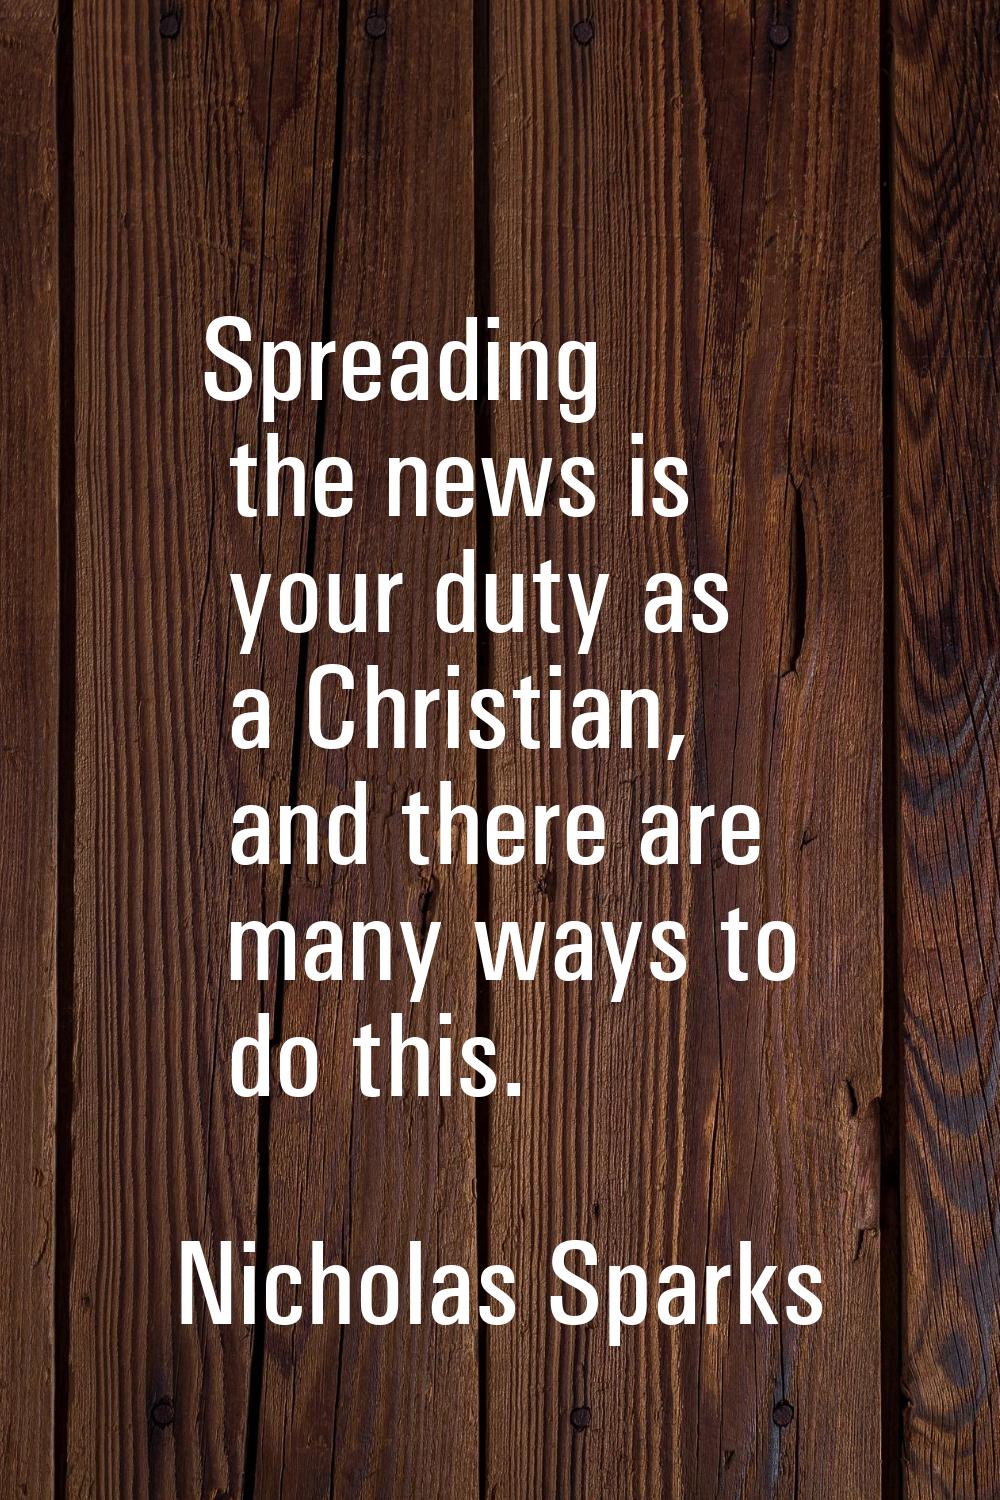 Spreading the news is your duty as a Christian, and there are many ways to do this.